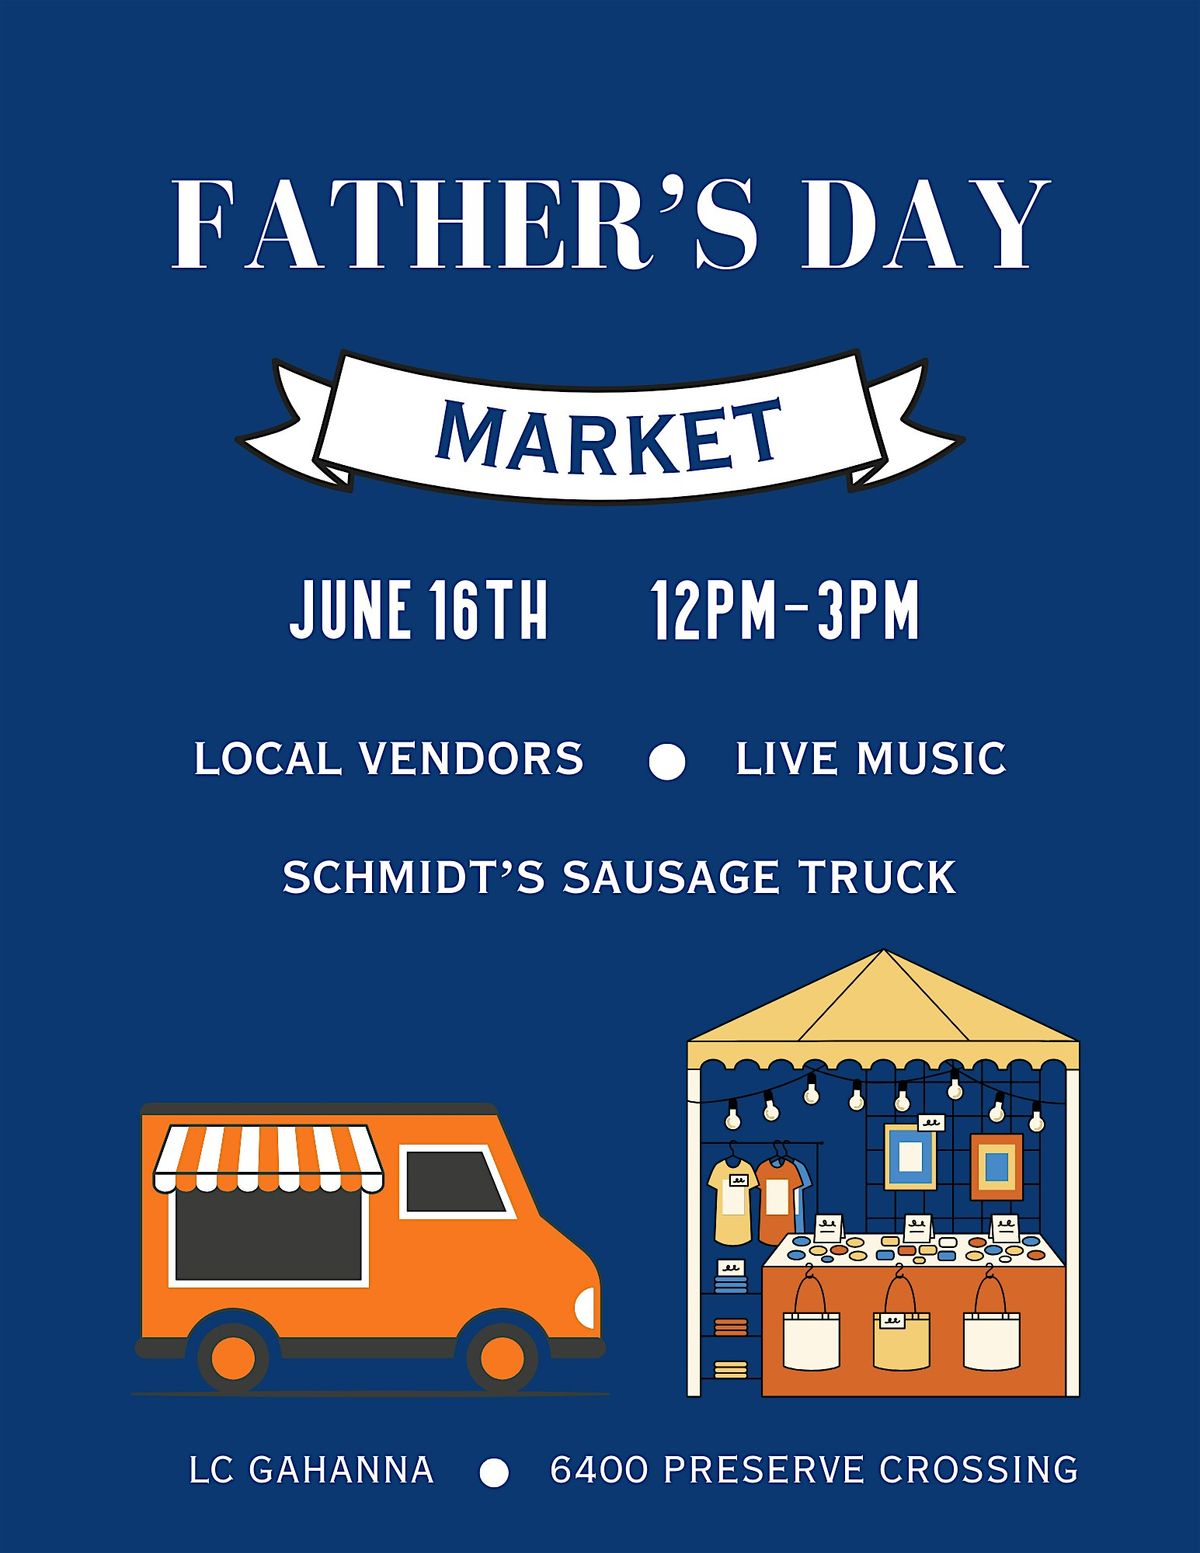 Father's Day Market!